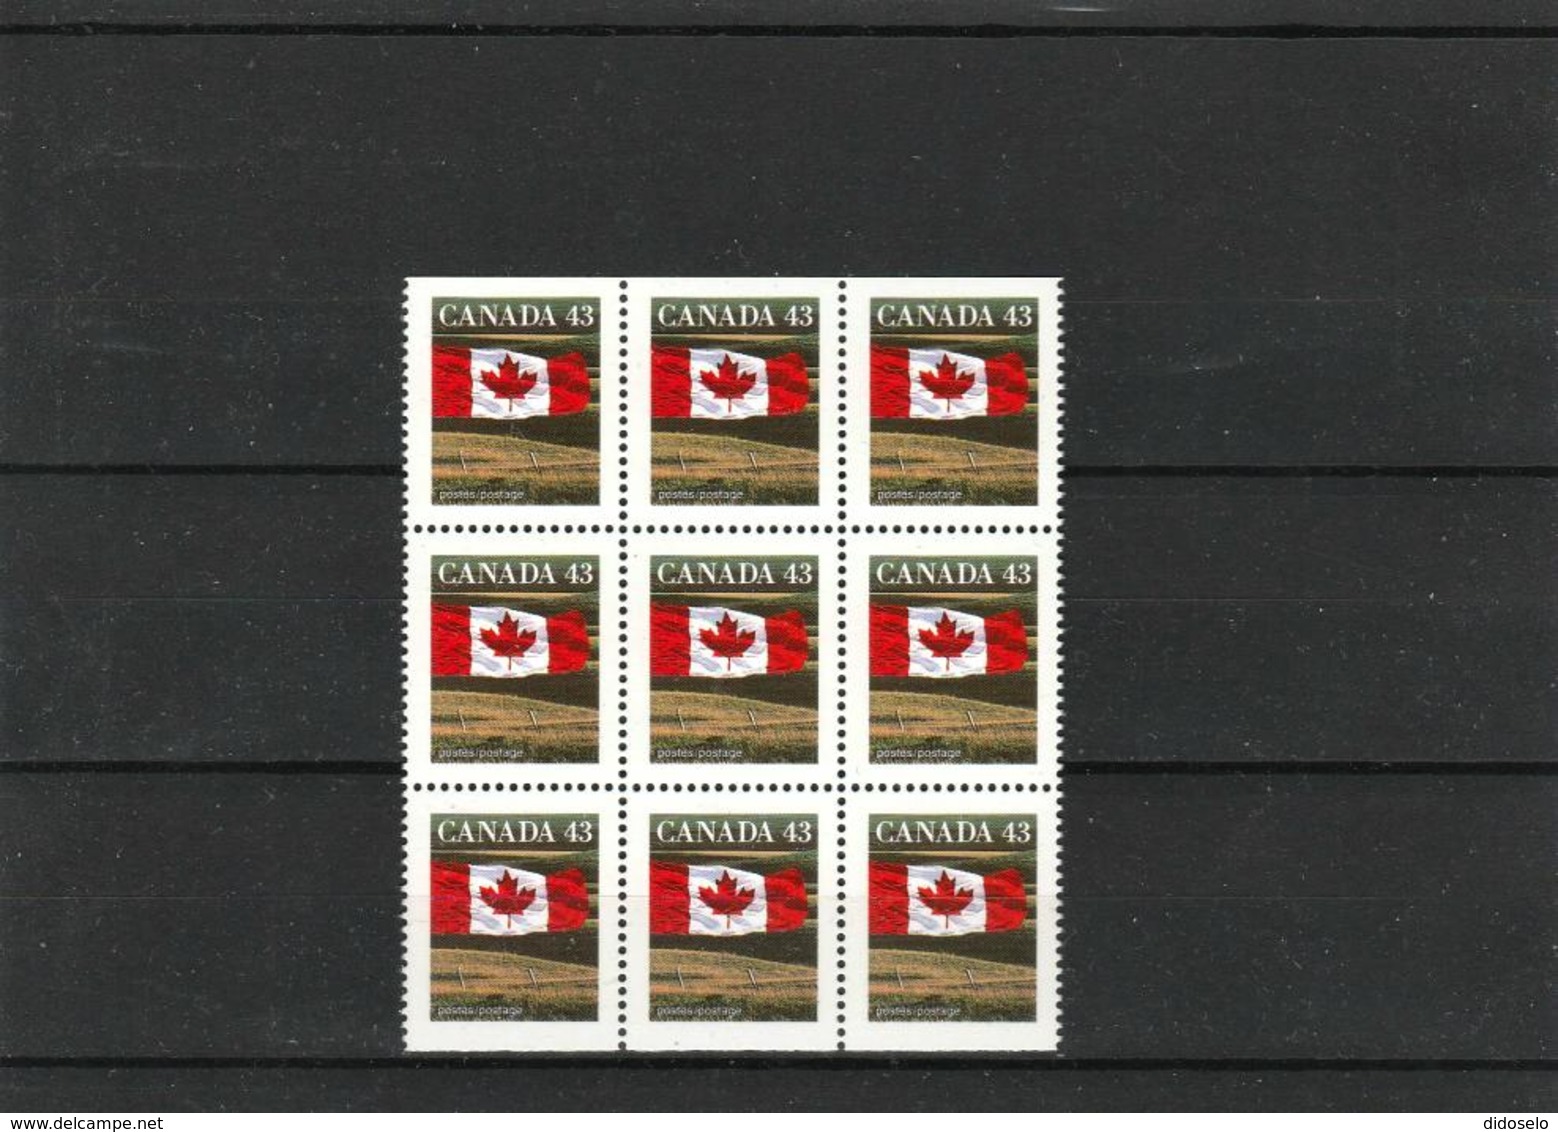 Canada -1992- Michel # 1338 A+D - Block Of 9 - MNH (**) - Single Stamps